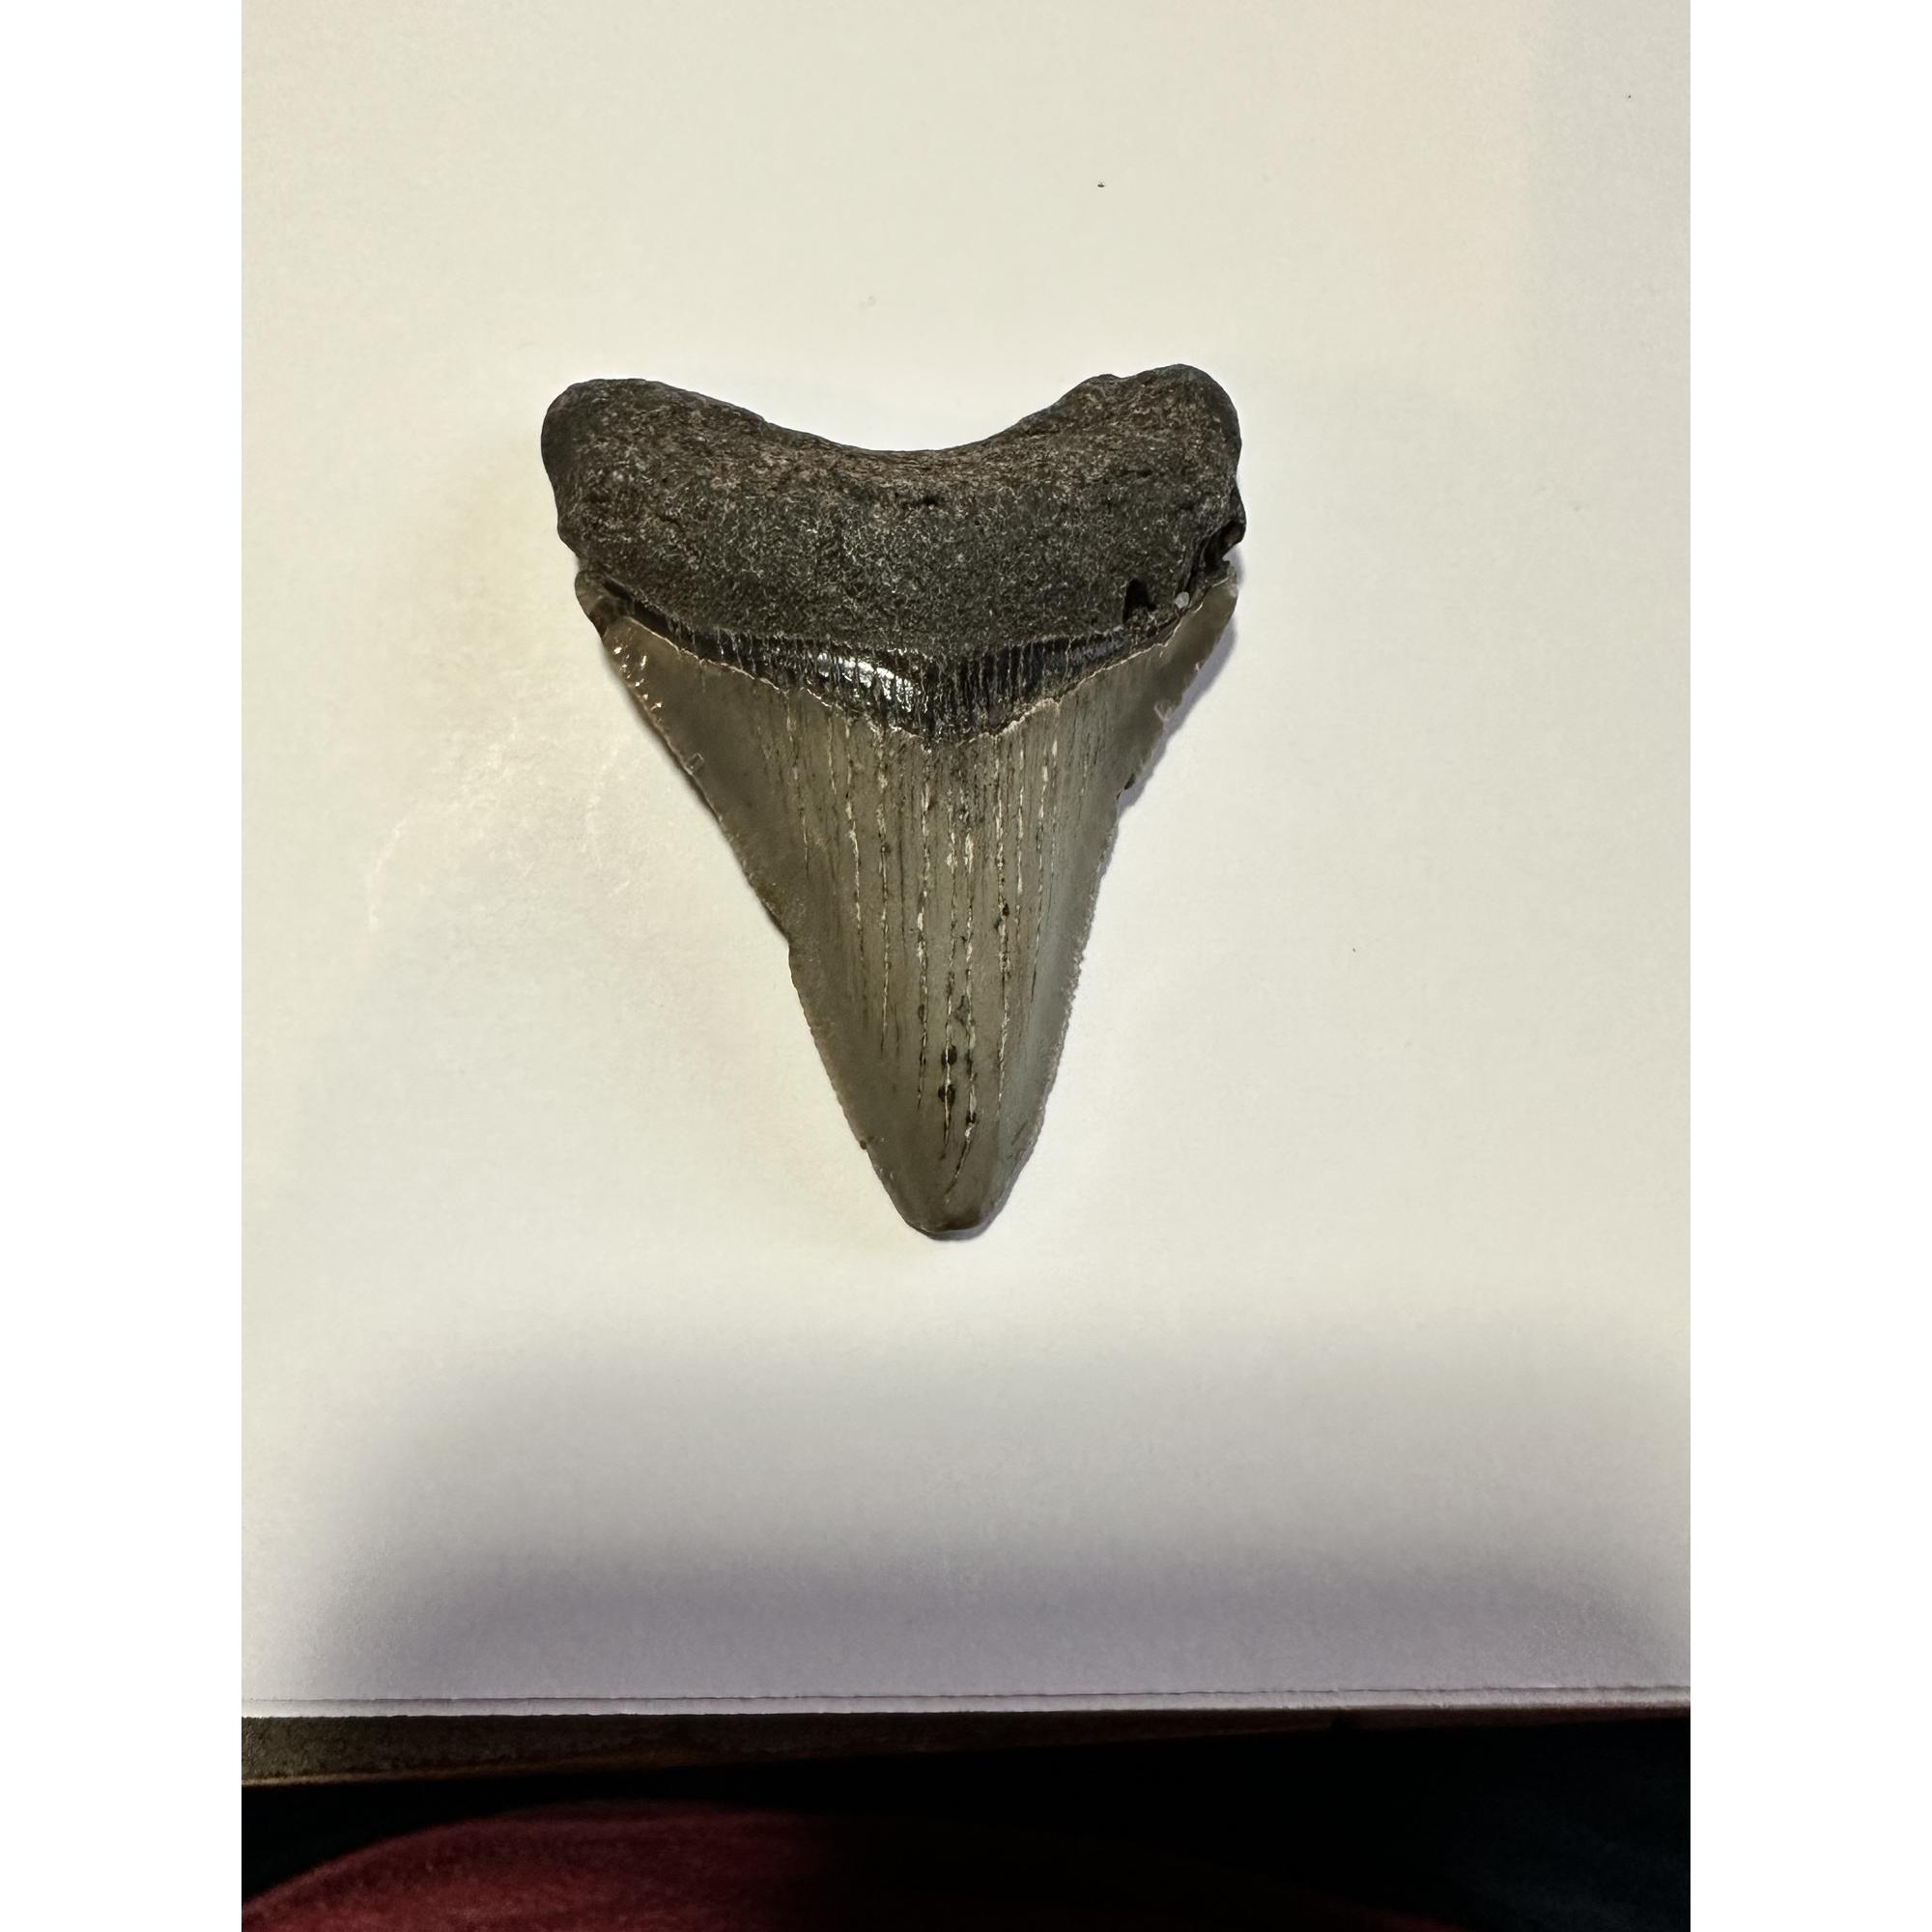 Beautiful megalodon tooth measuring 2.75 inches with an enamel front and back of a medium gray color